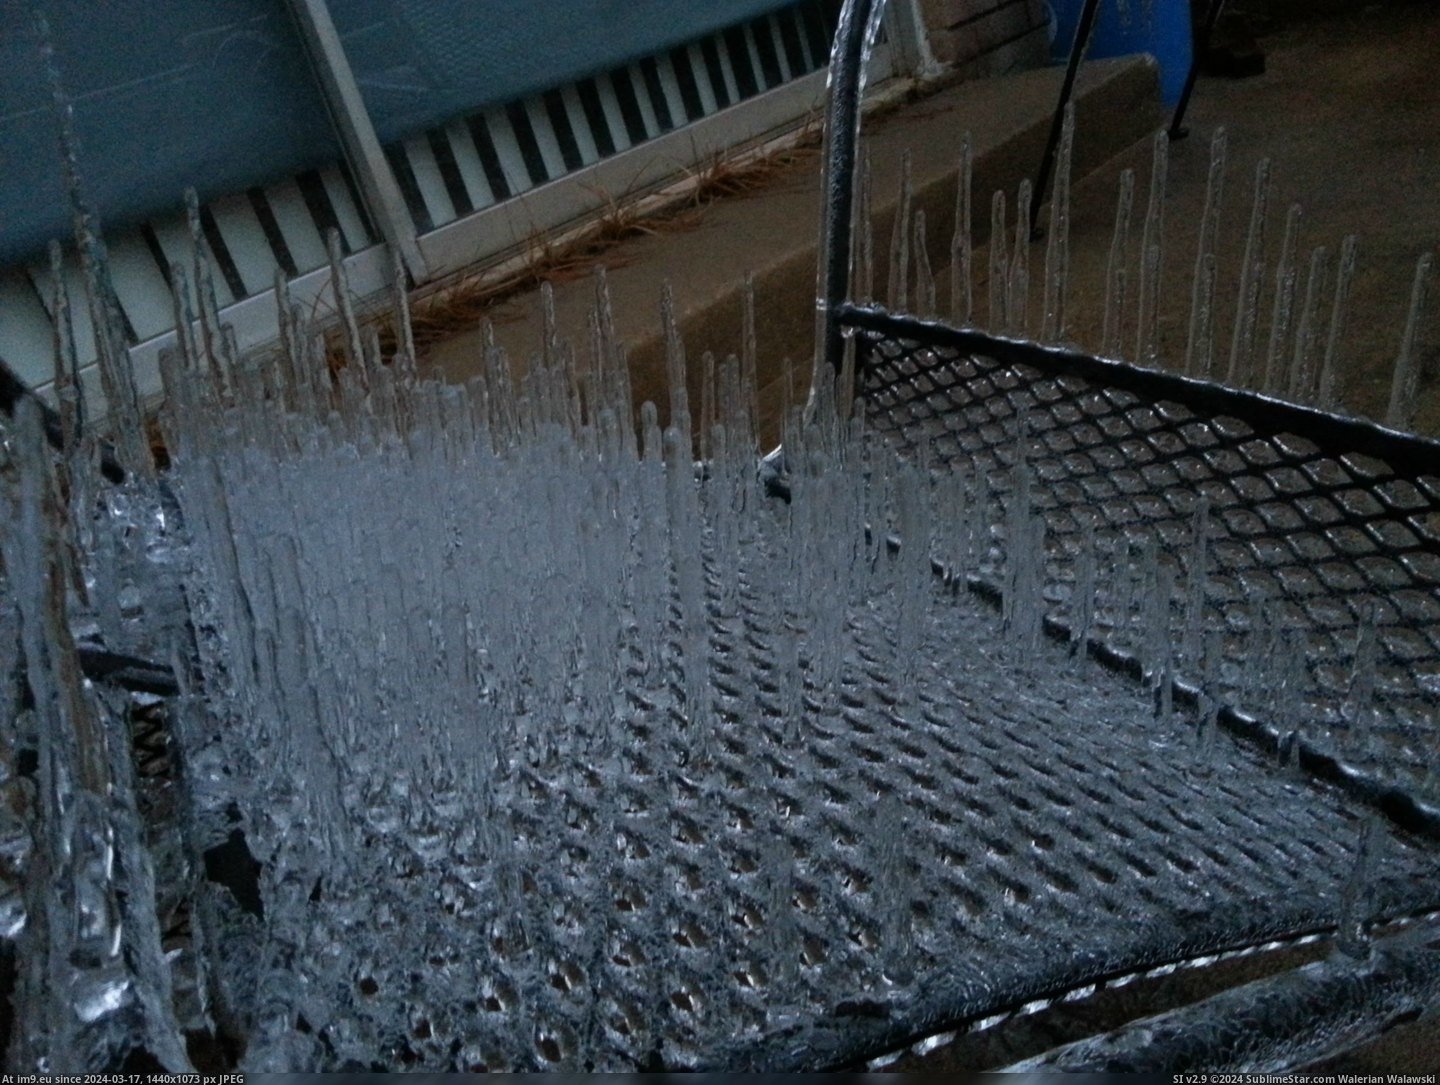 #Ice #Storm #Mesh #Furniture #Patio [Mildlyinteresting] This is what happens to mesh patio furniture in an ice storm 2 Pic. (Изображение из альбом My r/MILDLYINTERESTING favs))